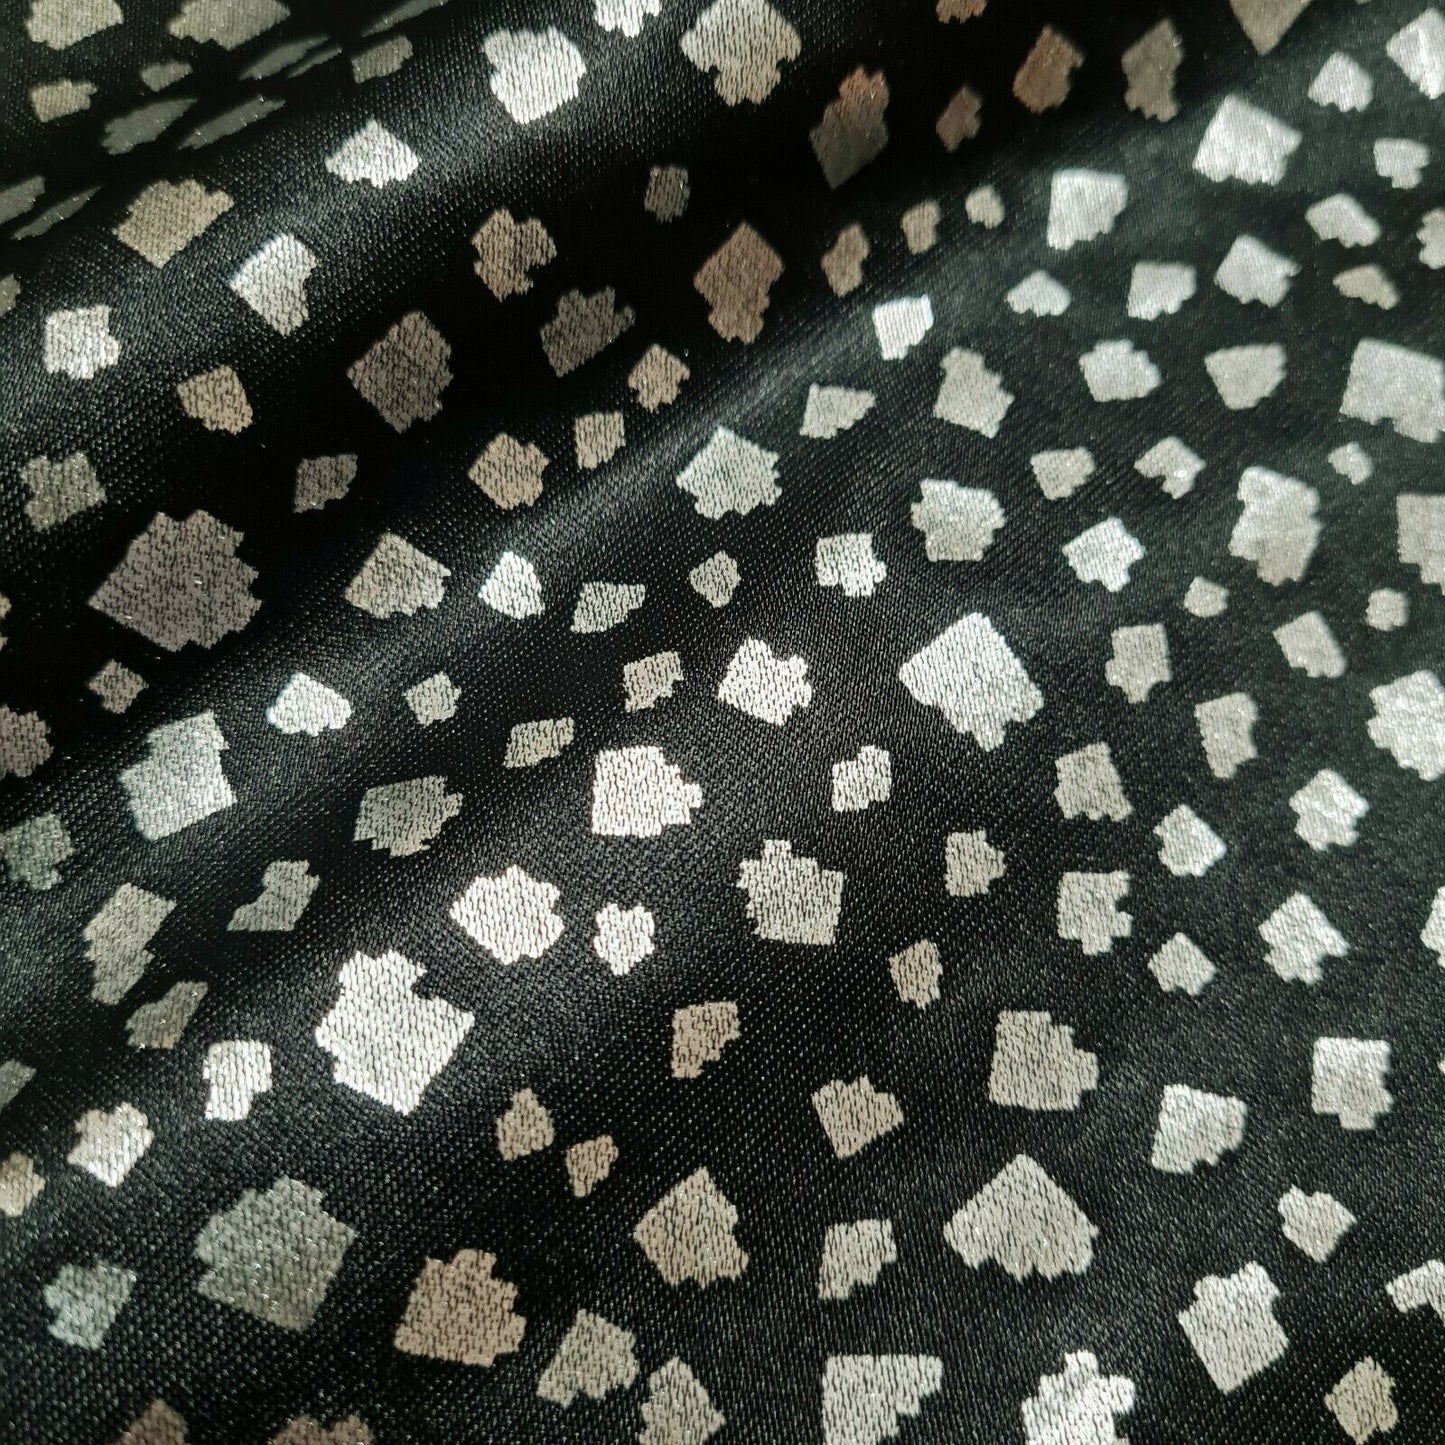 Satin Fabric Silver Spots Printed Black Colour 55" Wide Sold By The Metre